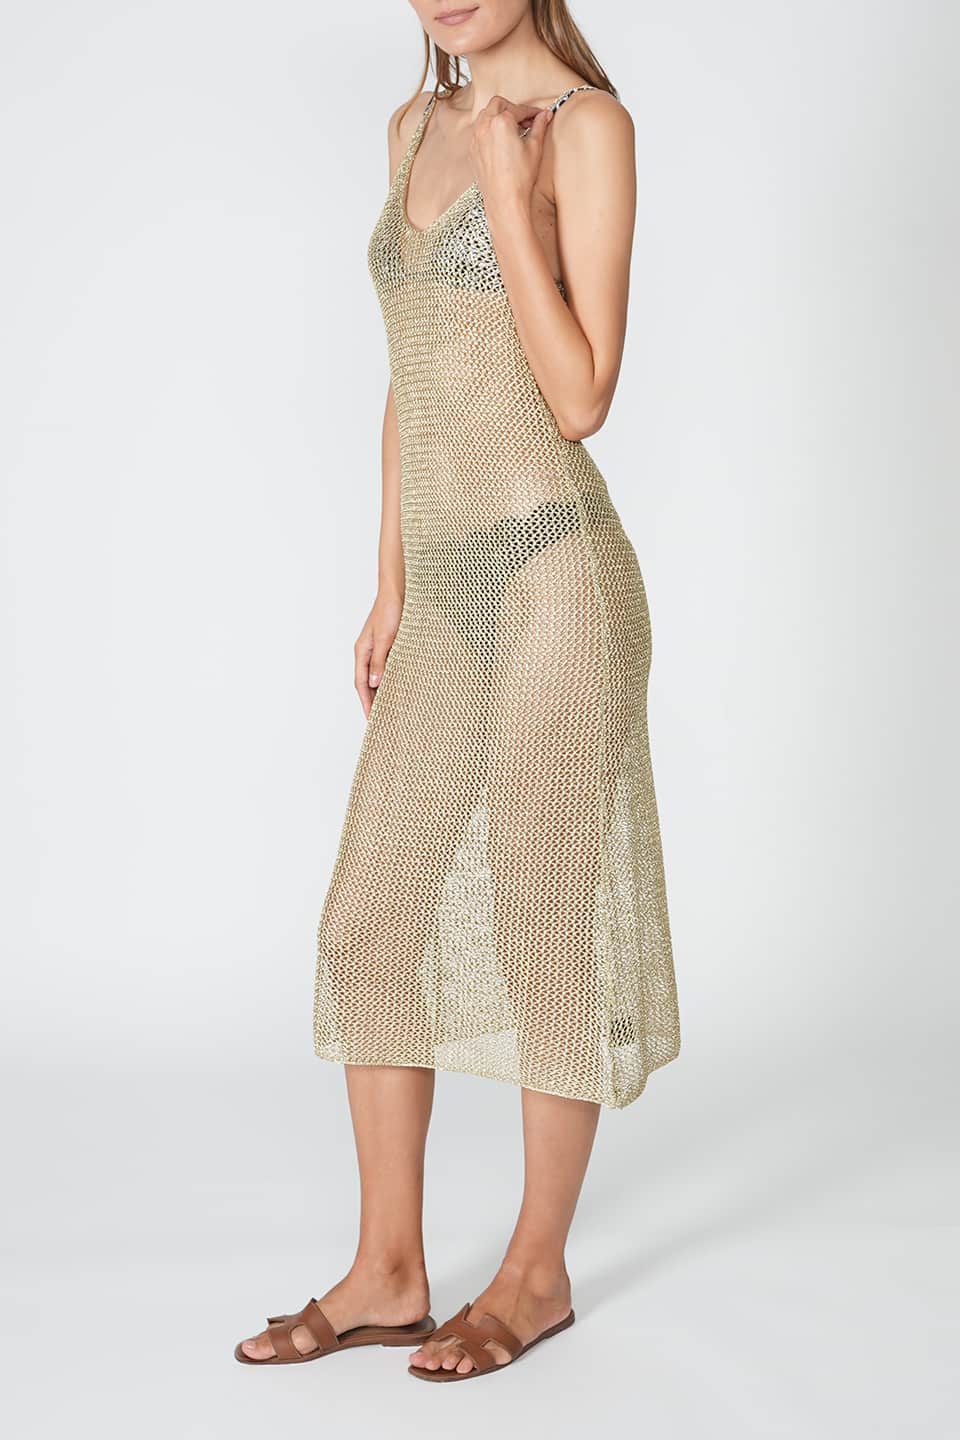 Thumbnail for Product gallery 2, Corin Dress Gold